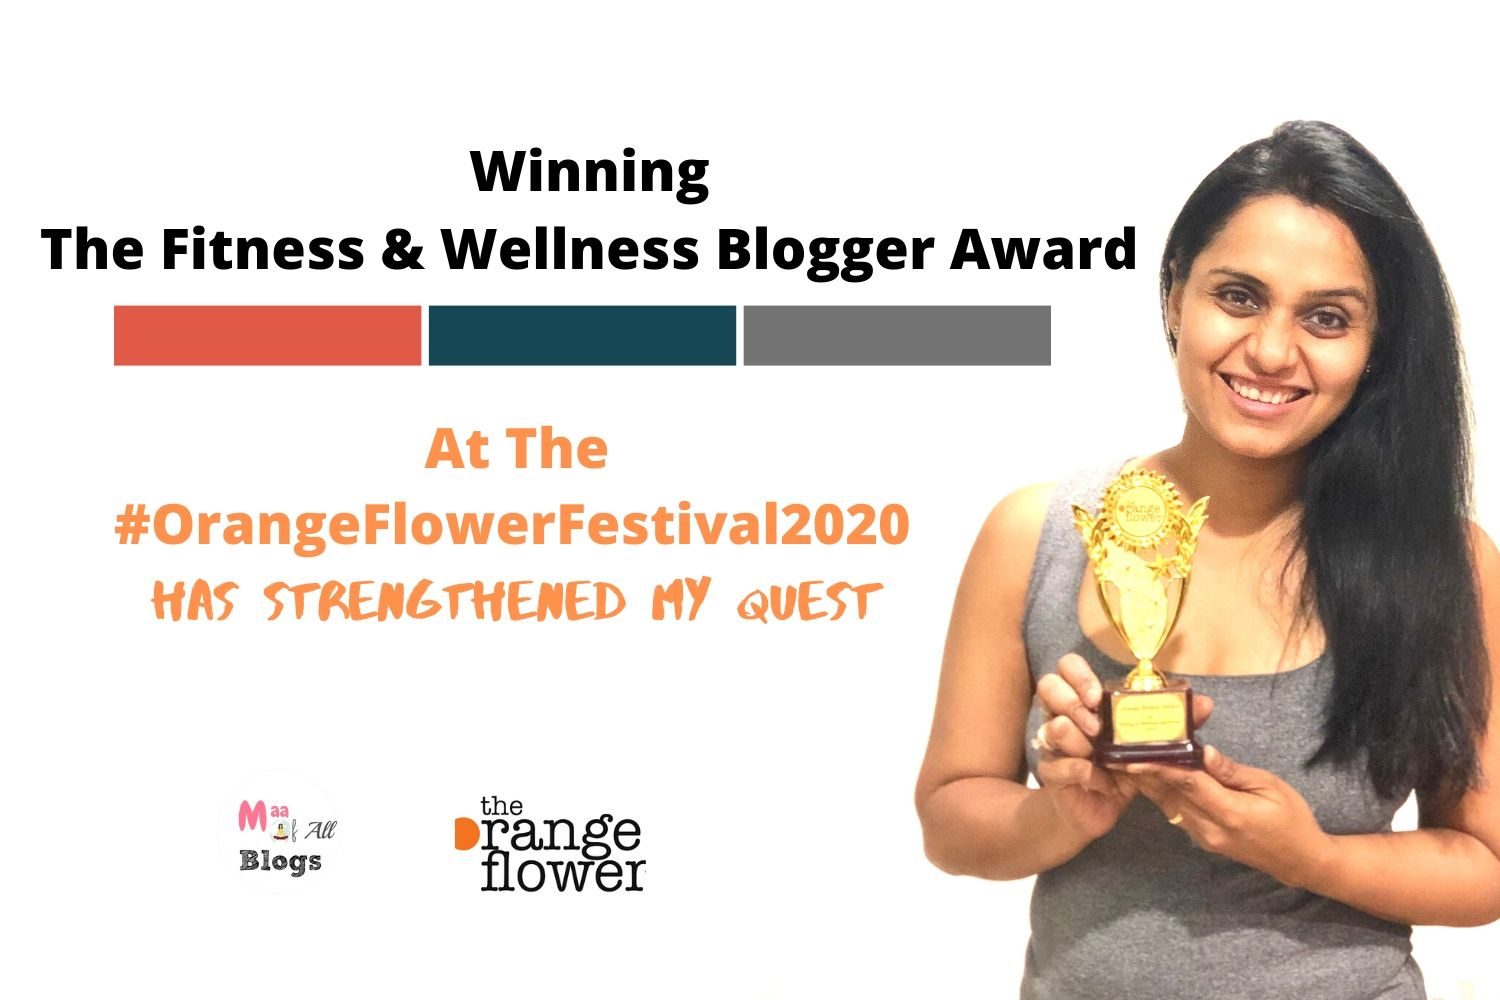 Winning The Fitness and Wellness Blogger Award At the #orangeflowerfestival2020 by women's web